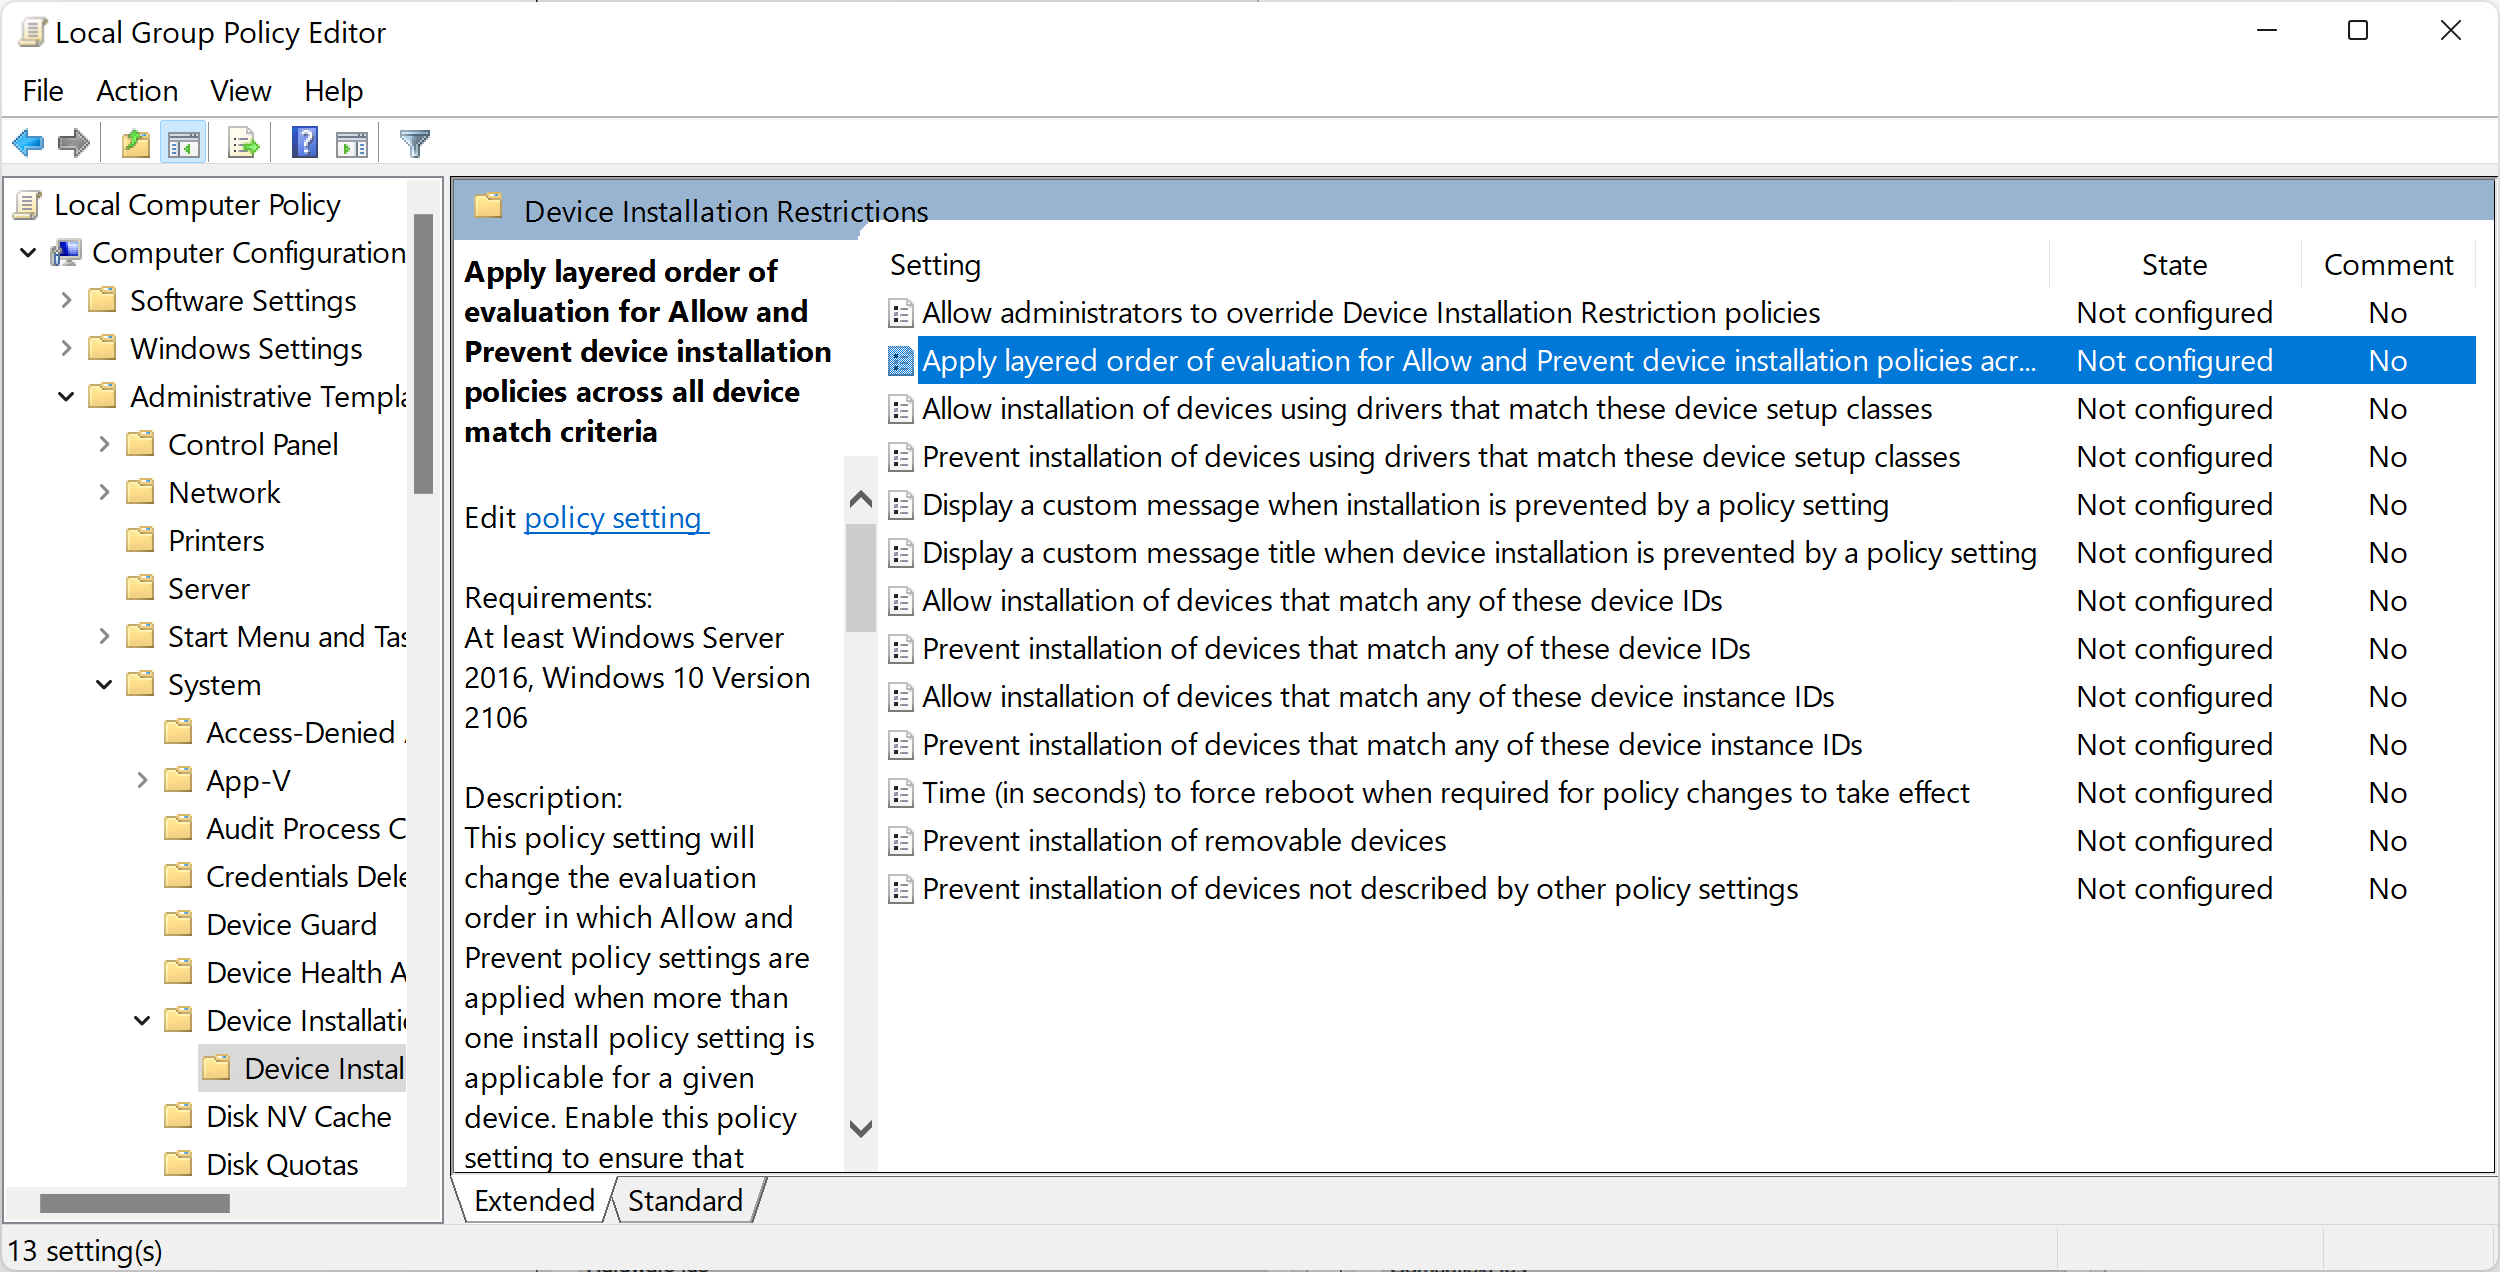 Open Device Manager by pressing Win+X and selecting Device Manager.
Expand the relevant category (e.g., Mice and other pointing devices, Keyboards) and right-click on the device.